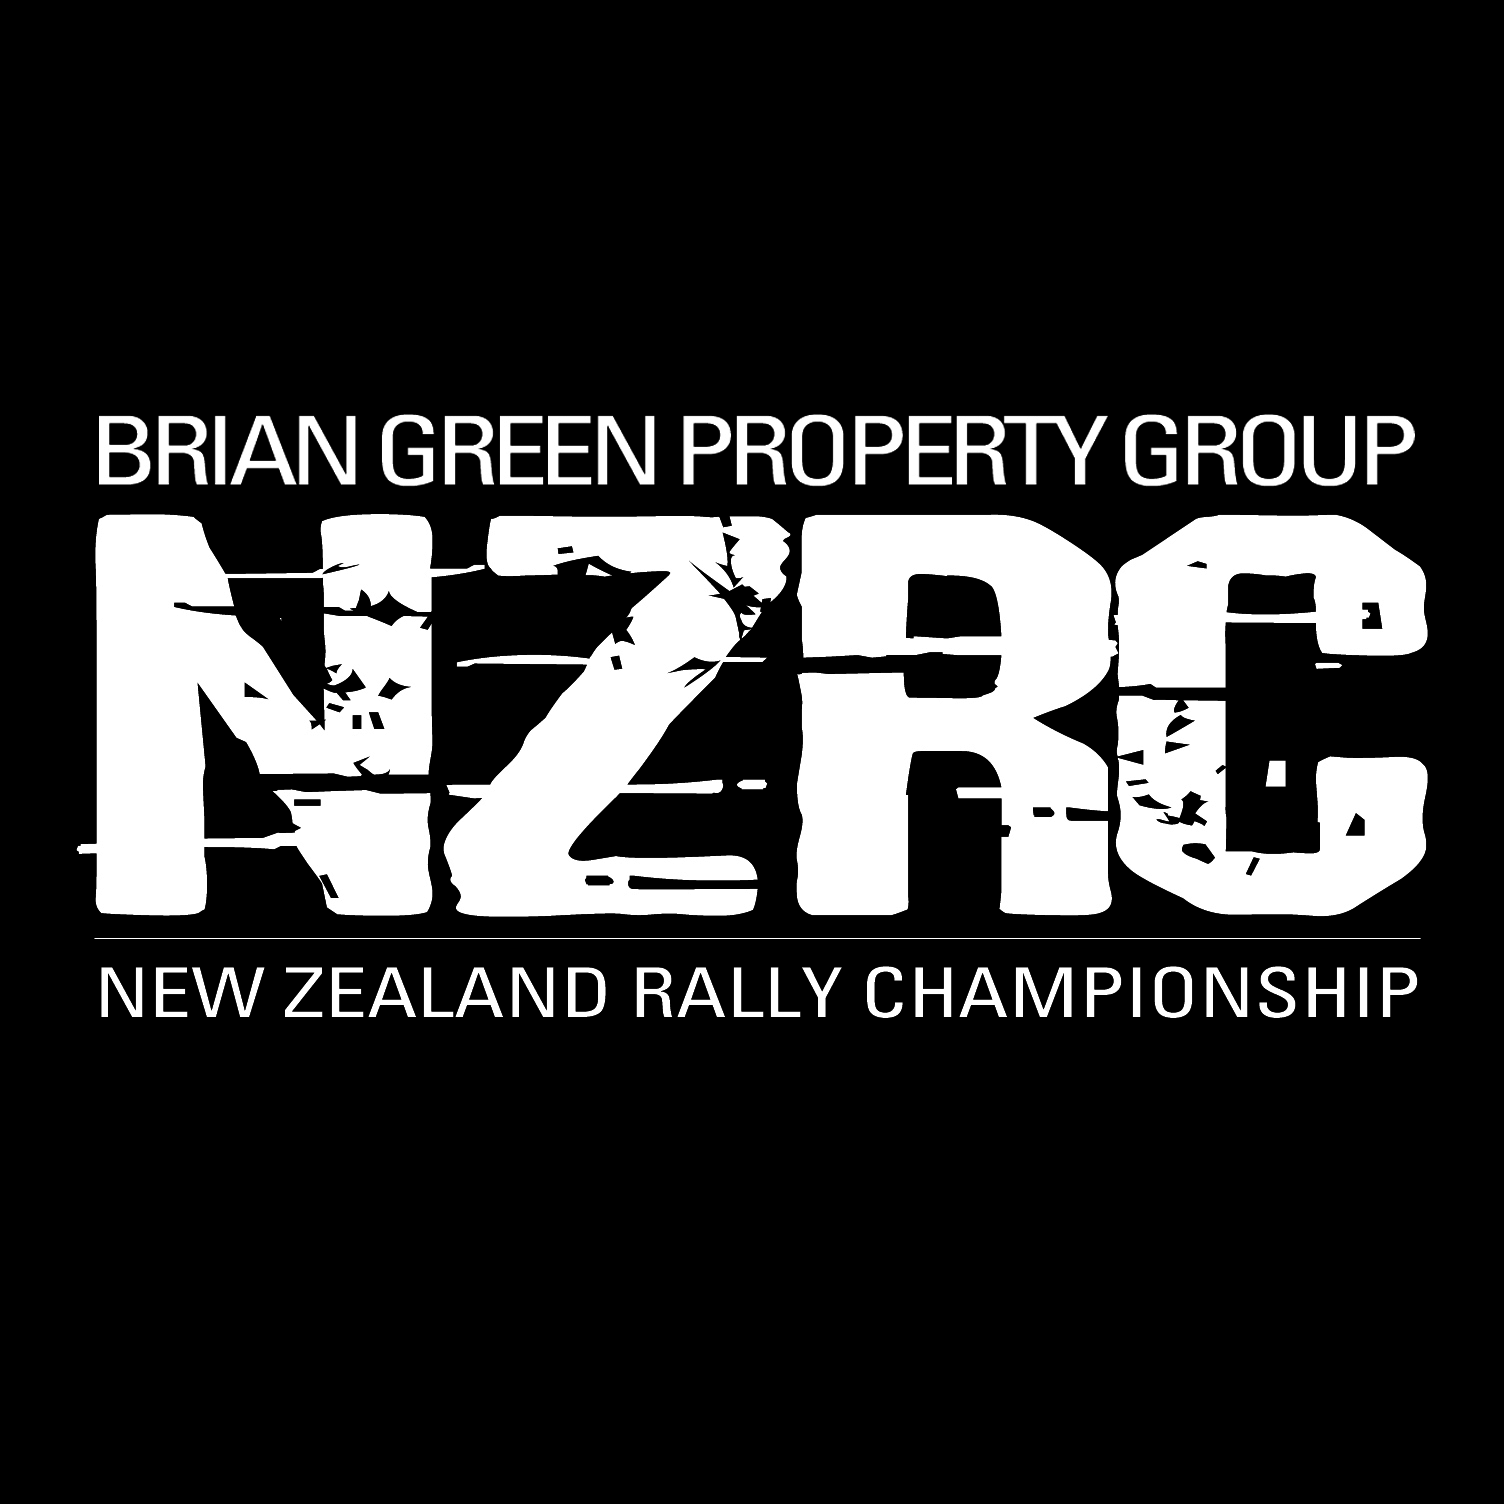 Feature: Back to the future at series finale | :: Brian Green Property Group New Zealand Rally Championship ::